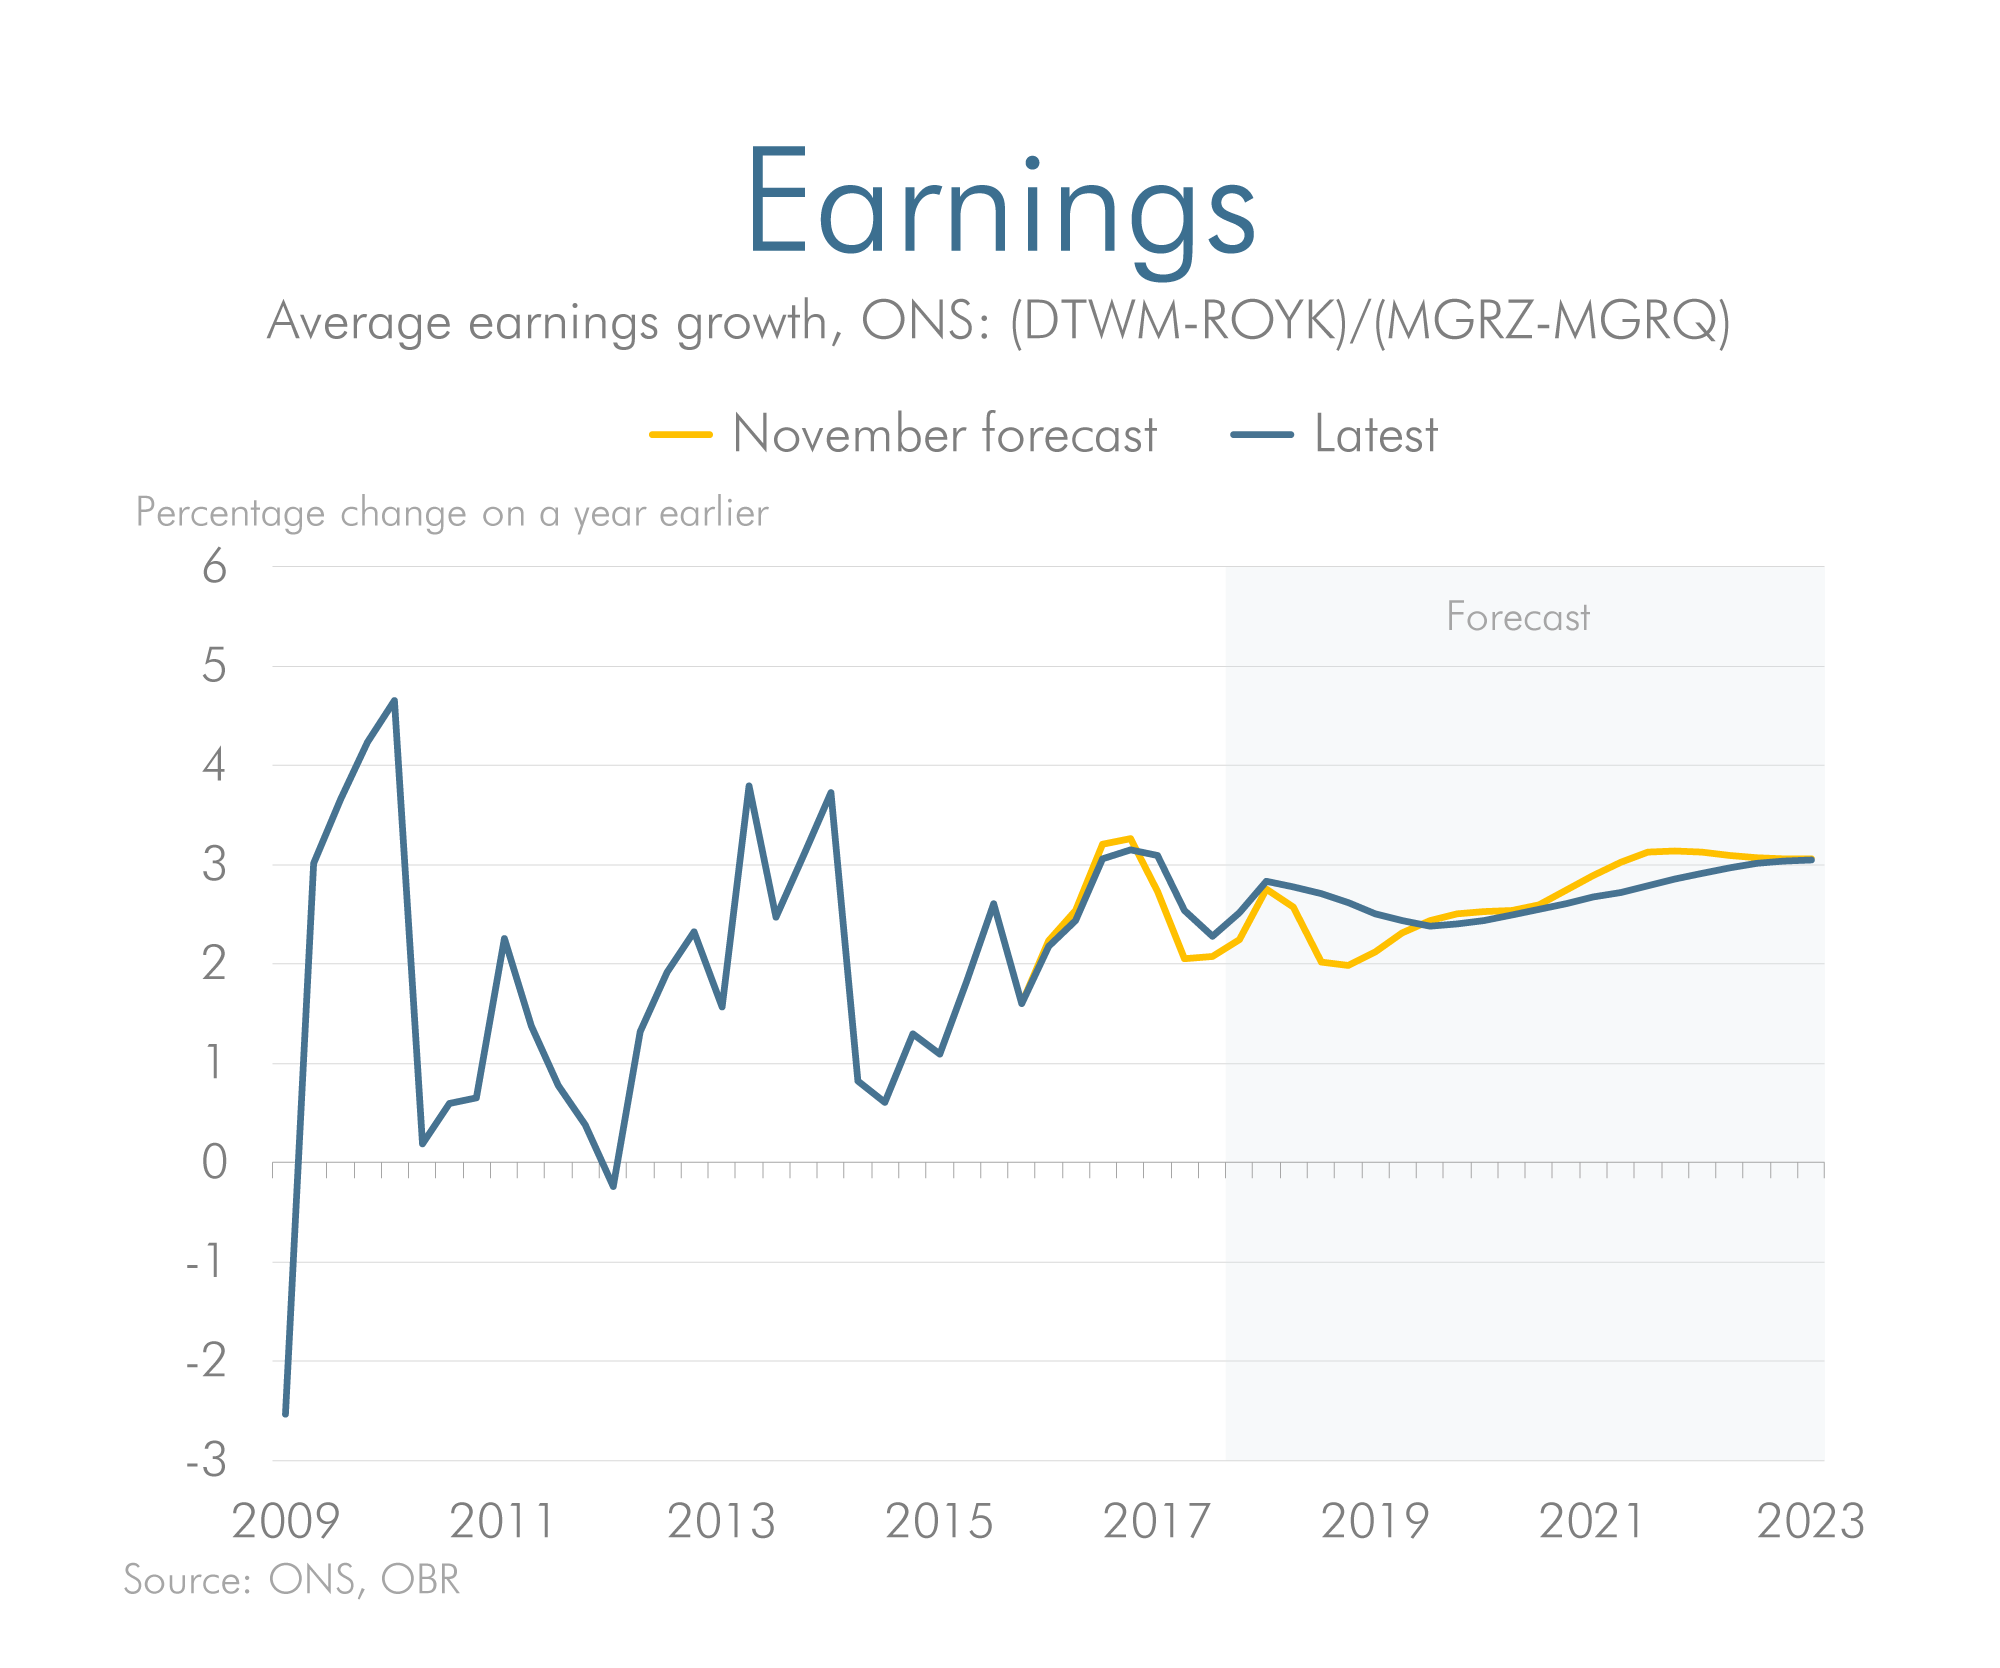 Latest forecast versus previous forecast for earnings